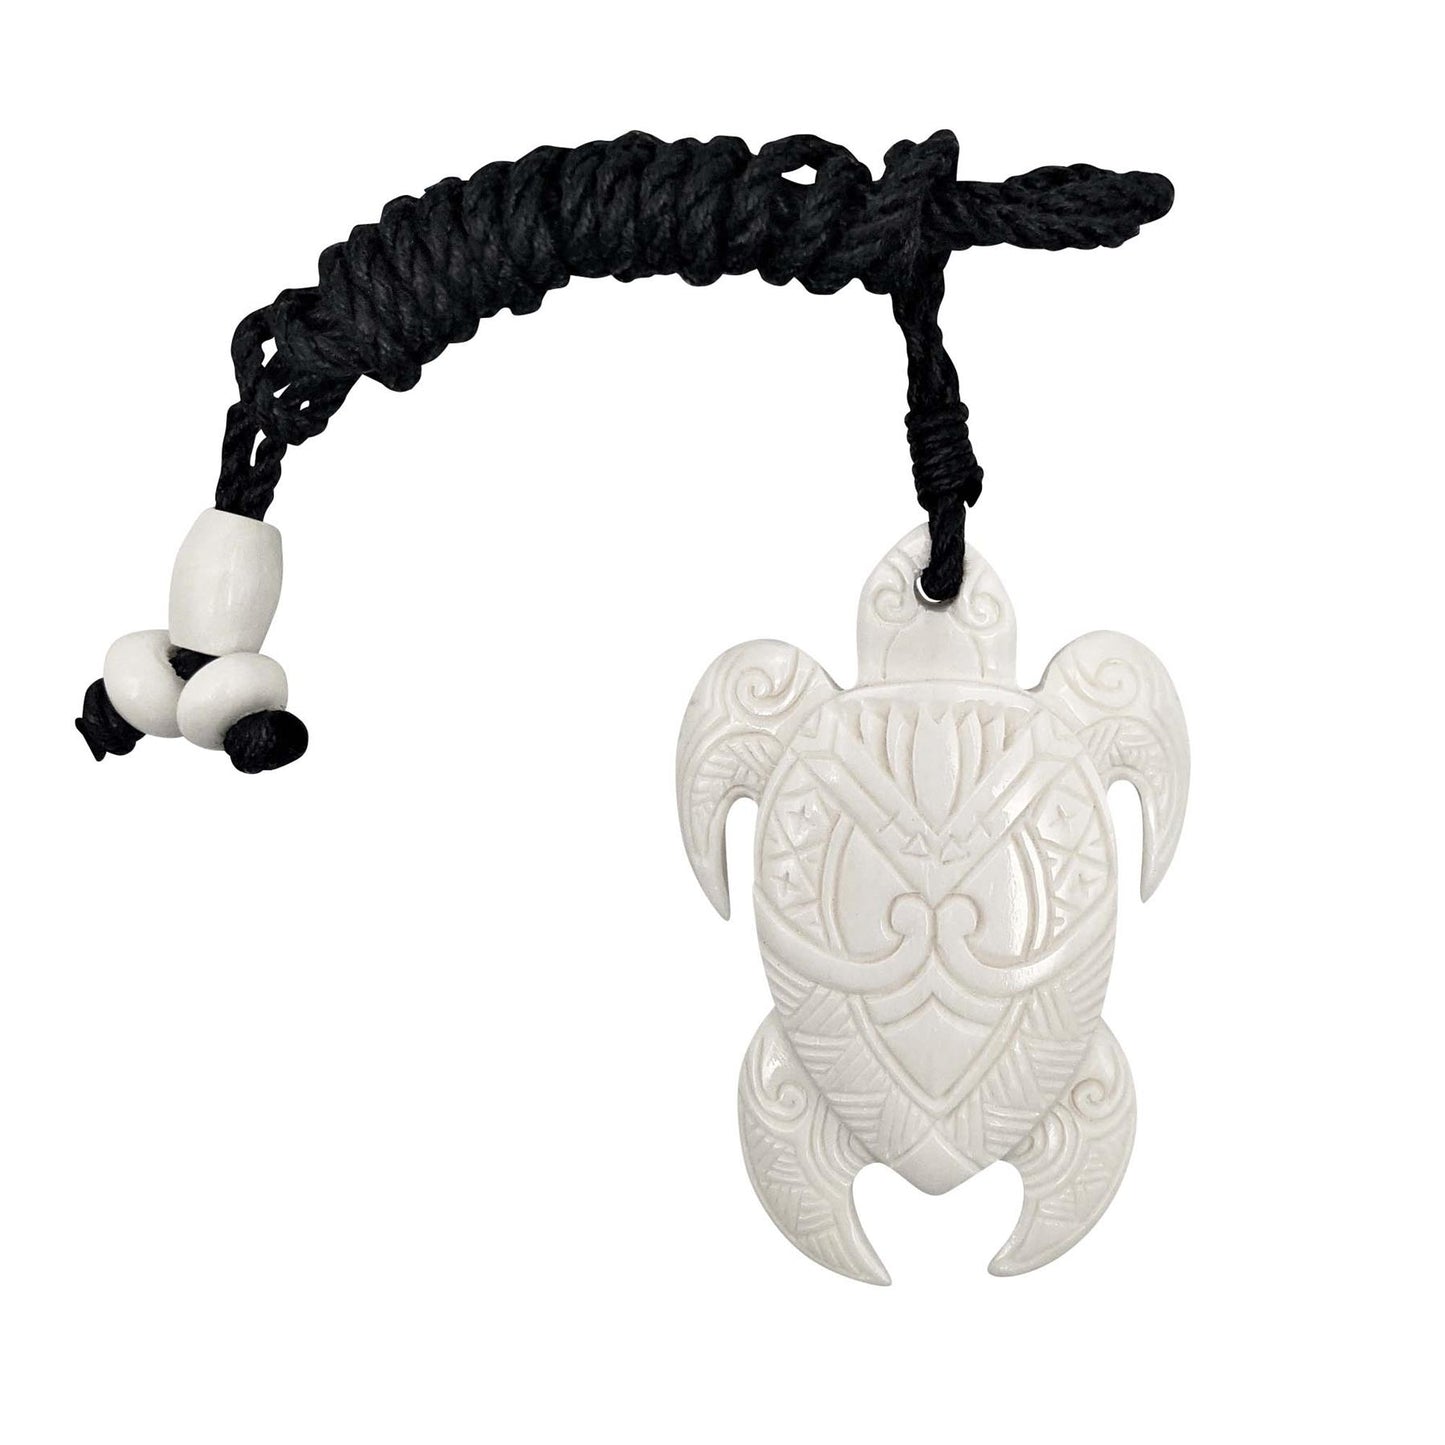 Balinese Hand-Carved Bone Pendent on Leather Necklace by Map Your Travels